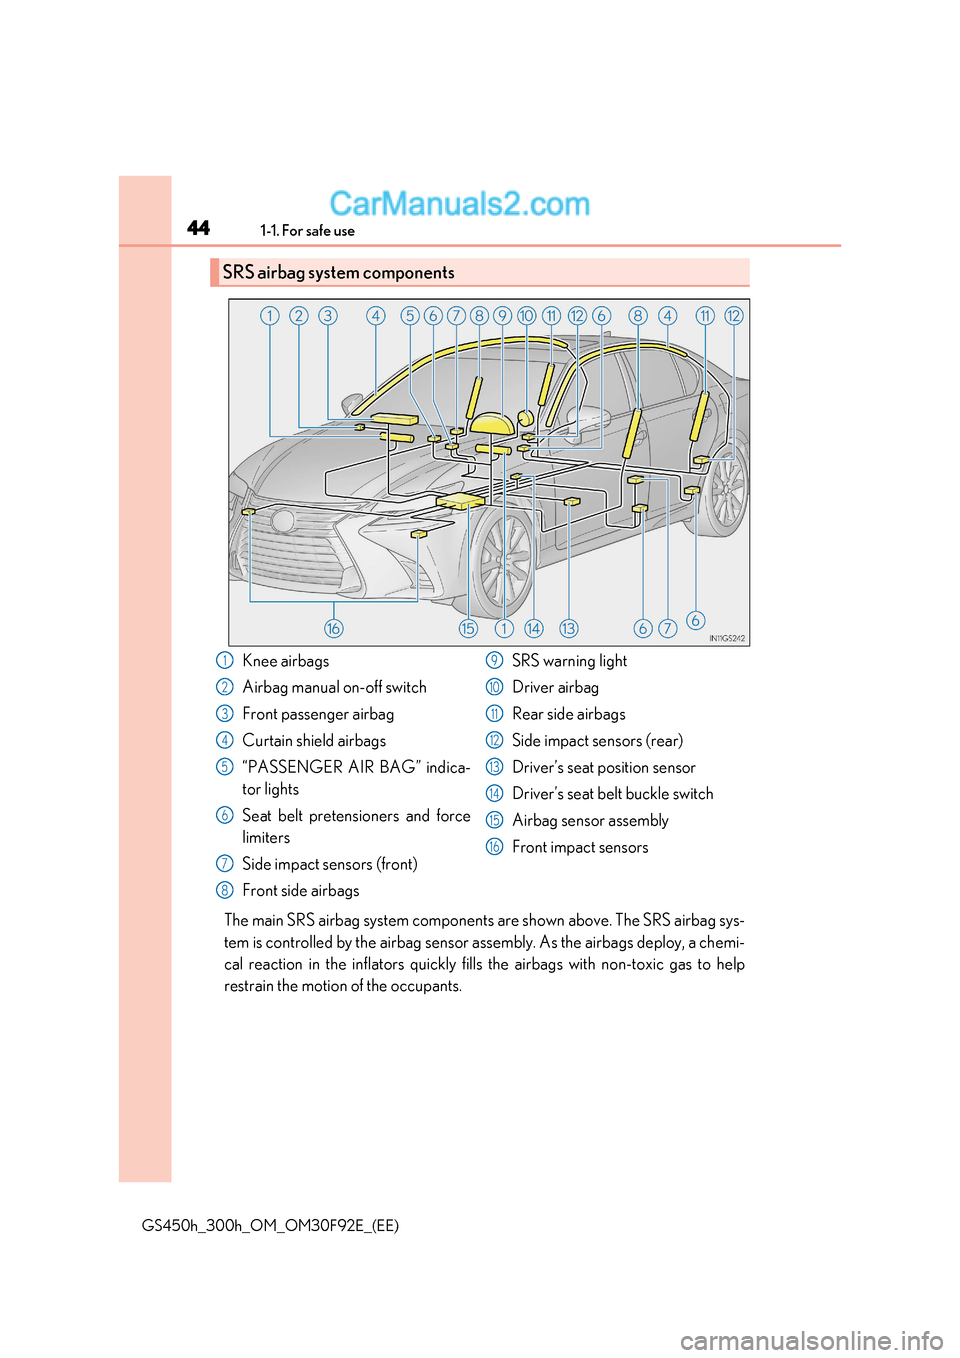 Lexus GS300h 2017 Service Manual 441-1. For safe use
GS450h_300h_OM_OM30F92E_(EE) The main SRS airbag system components are shown above. The SRS airbag sys- 
tem is controlled by the airbag sensor assembly. As the airbags deploy, a c